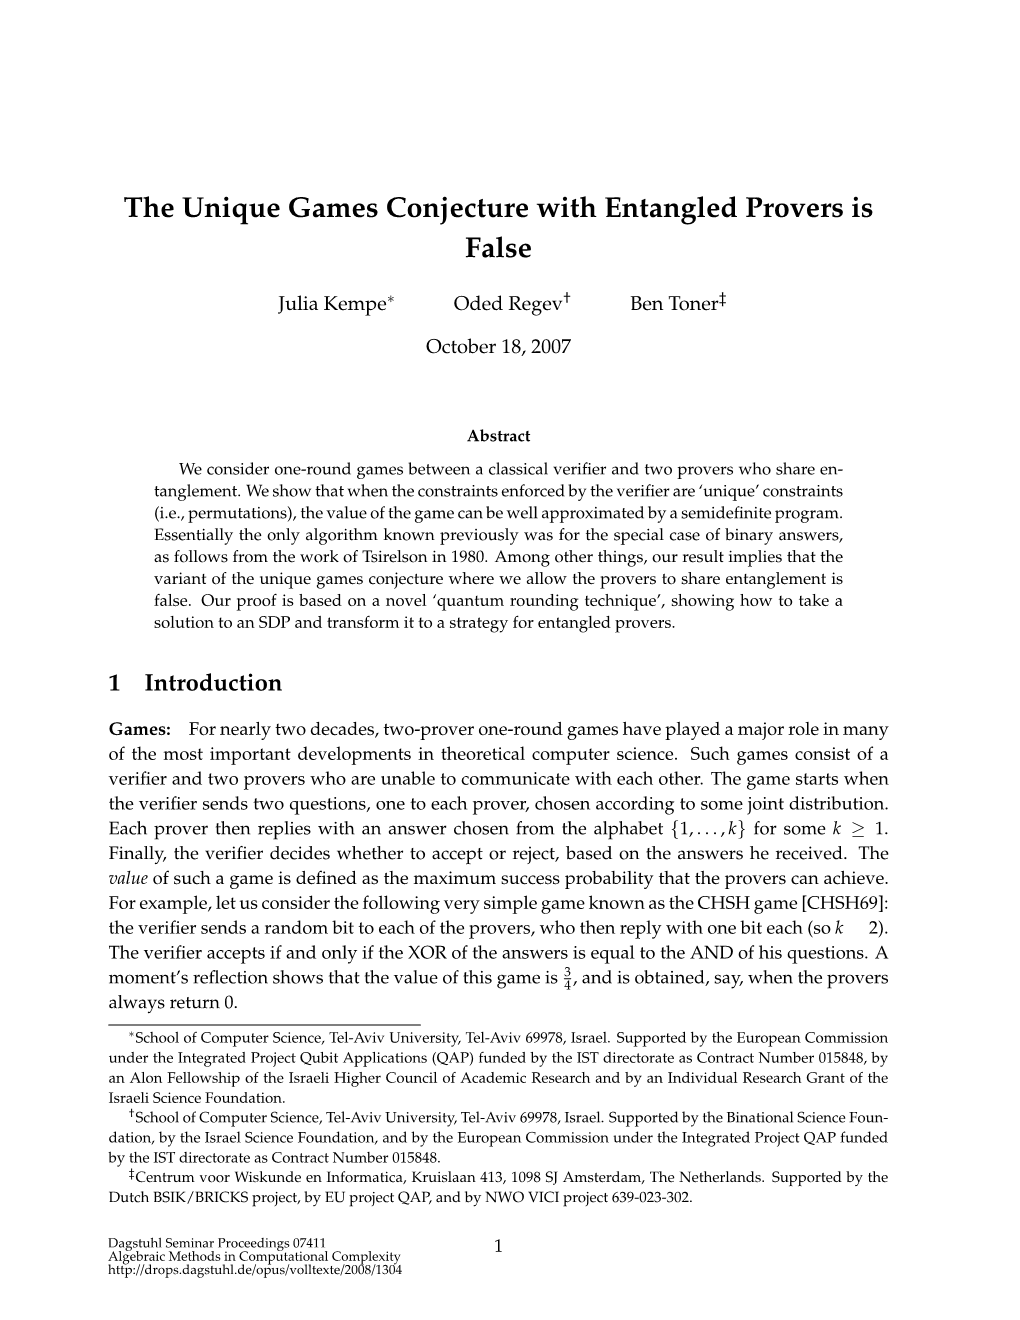 The Unique Games Conjecture with Entangled Provers Is False